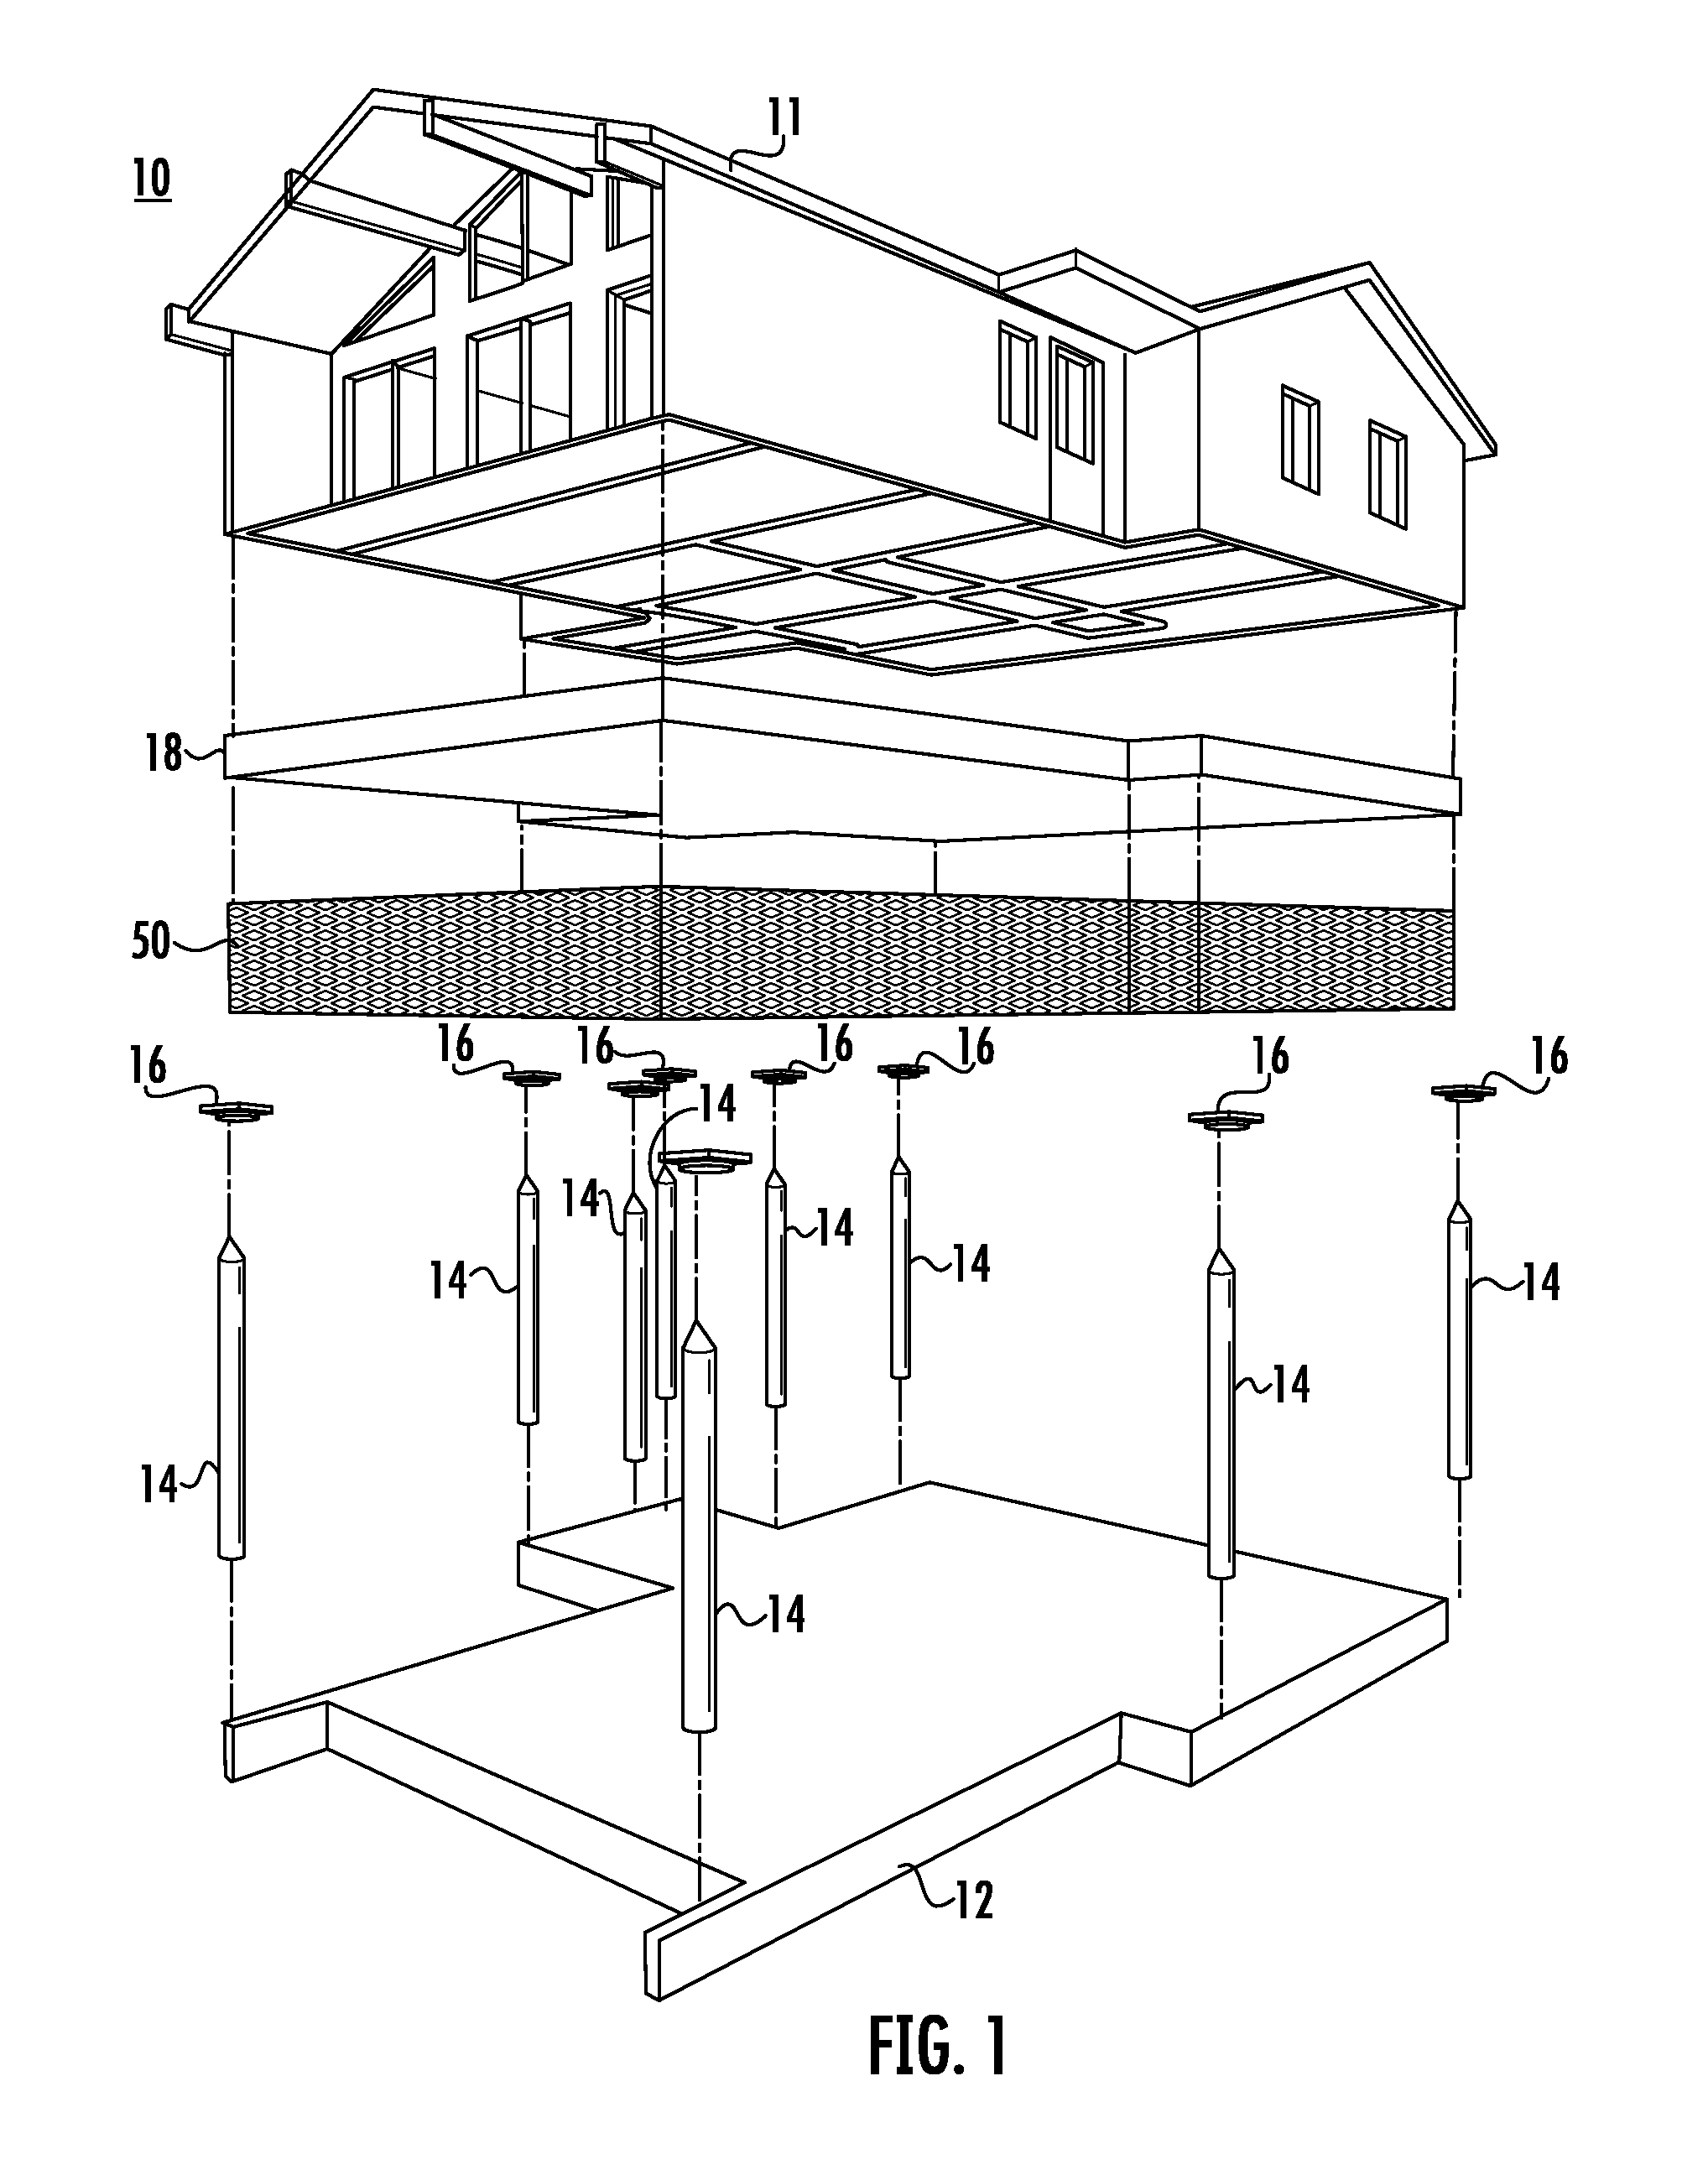 Method and system of raising an existing house in a flood or storm surge